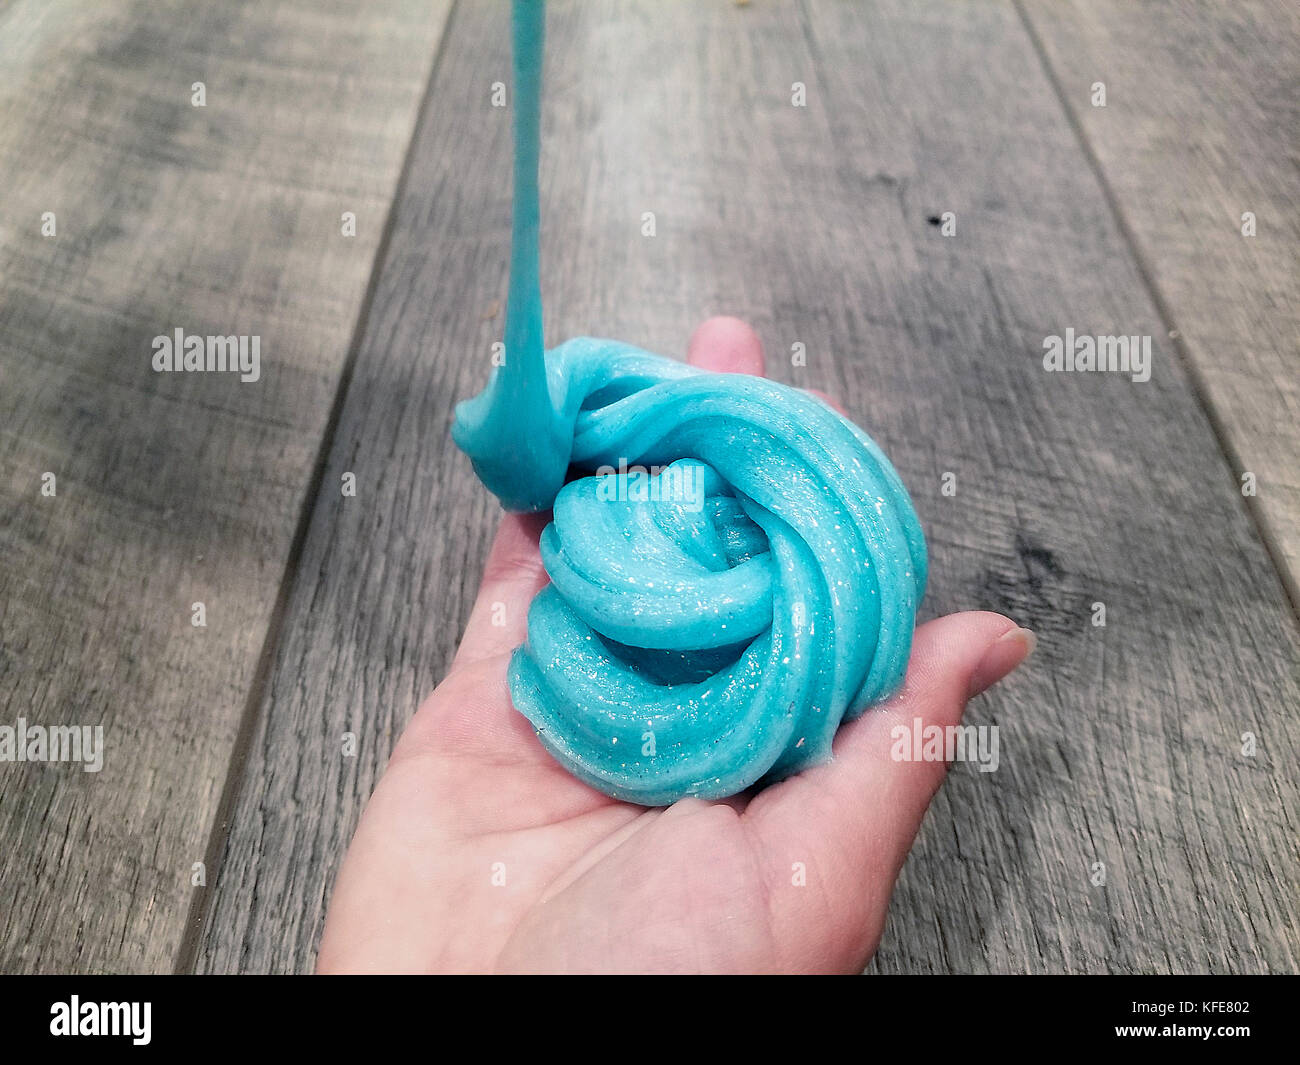 glob of turquoise glittery slime in young girl's hand Stock Photo